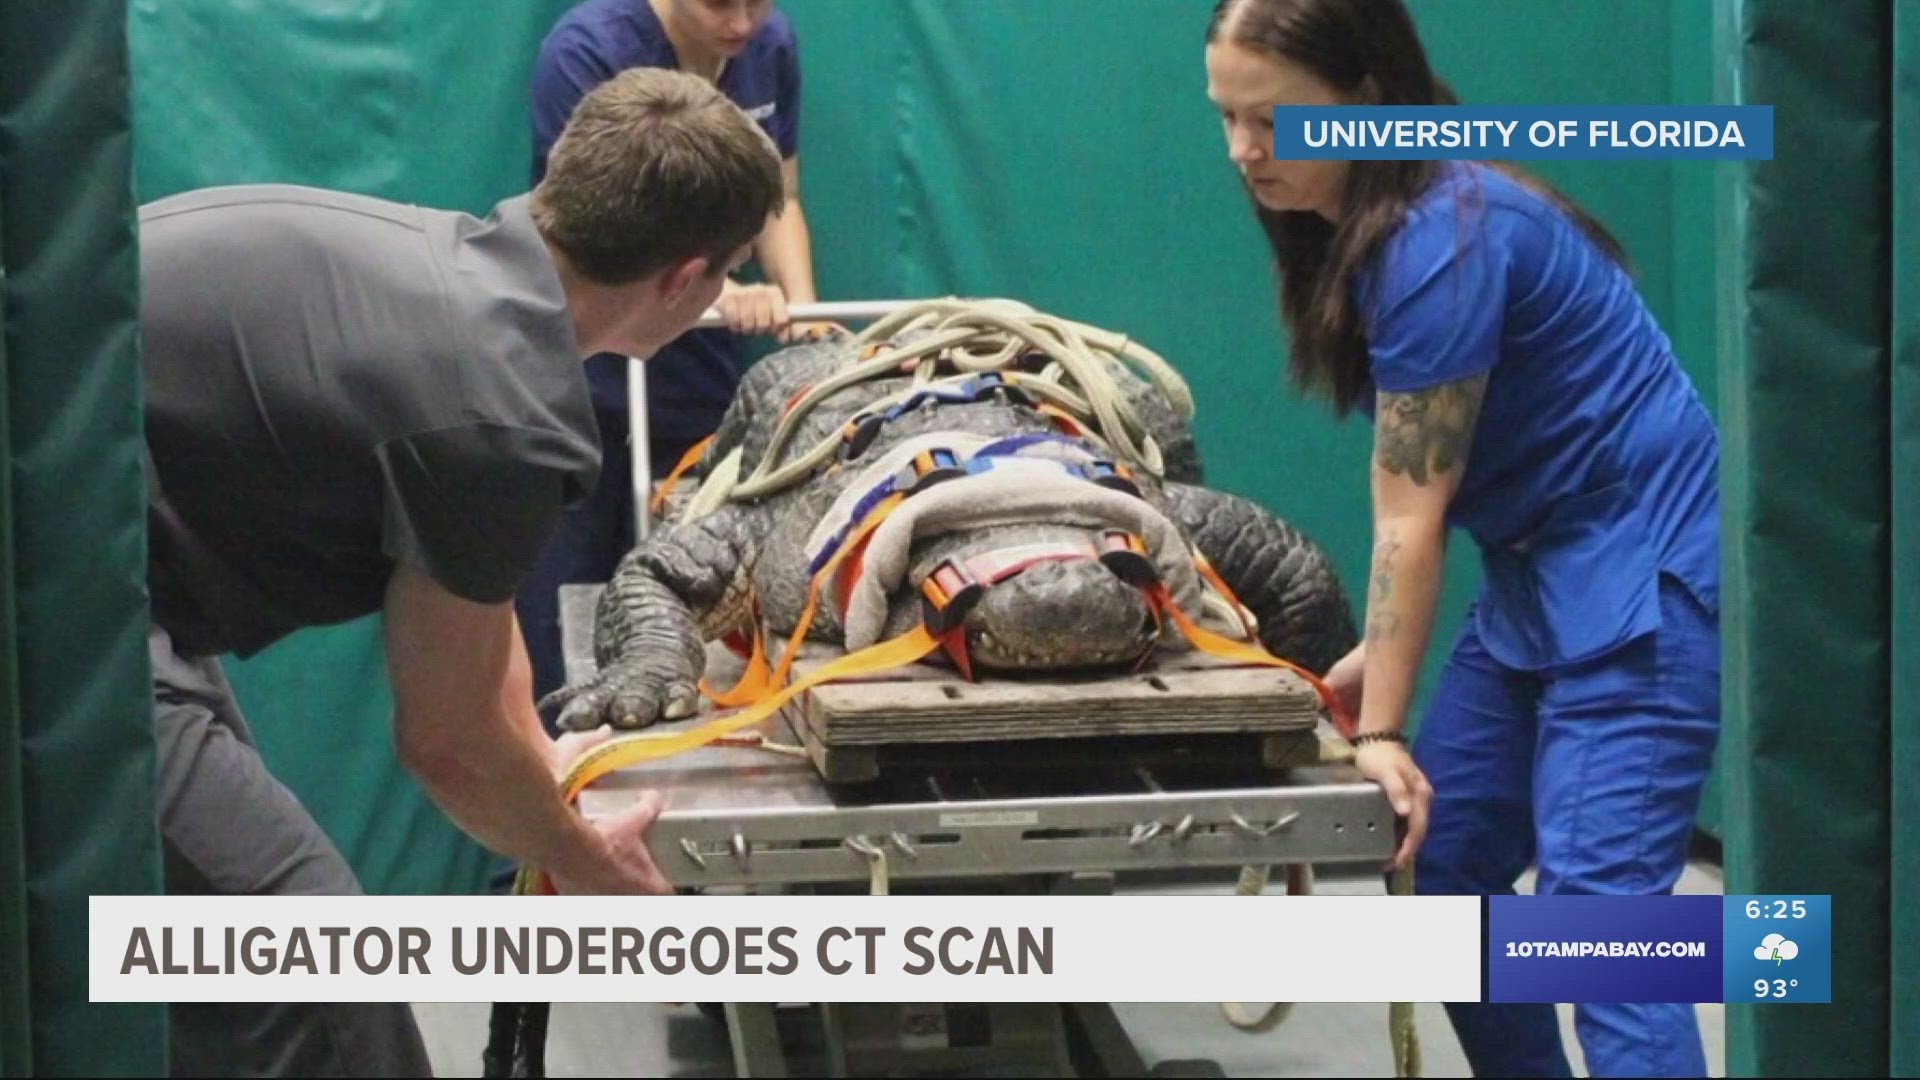 Veterinary medicine students at UF treated an alligator from the St. Augustine Alligator Farm Zoological Park.